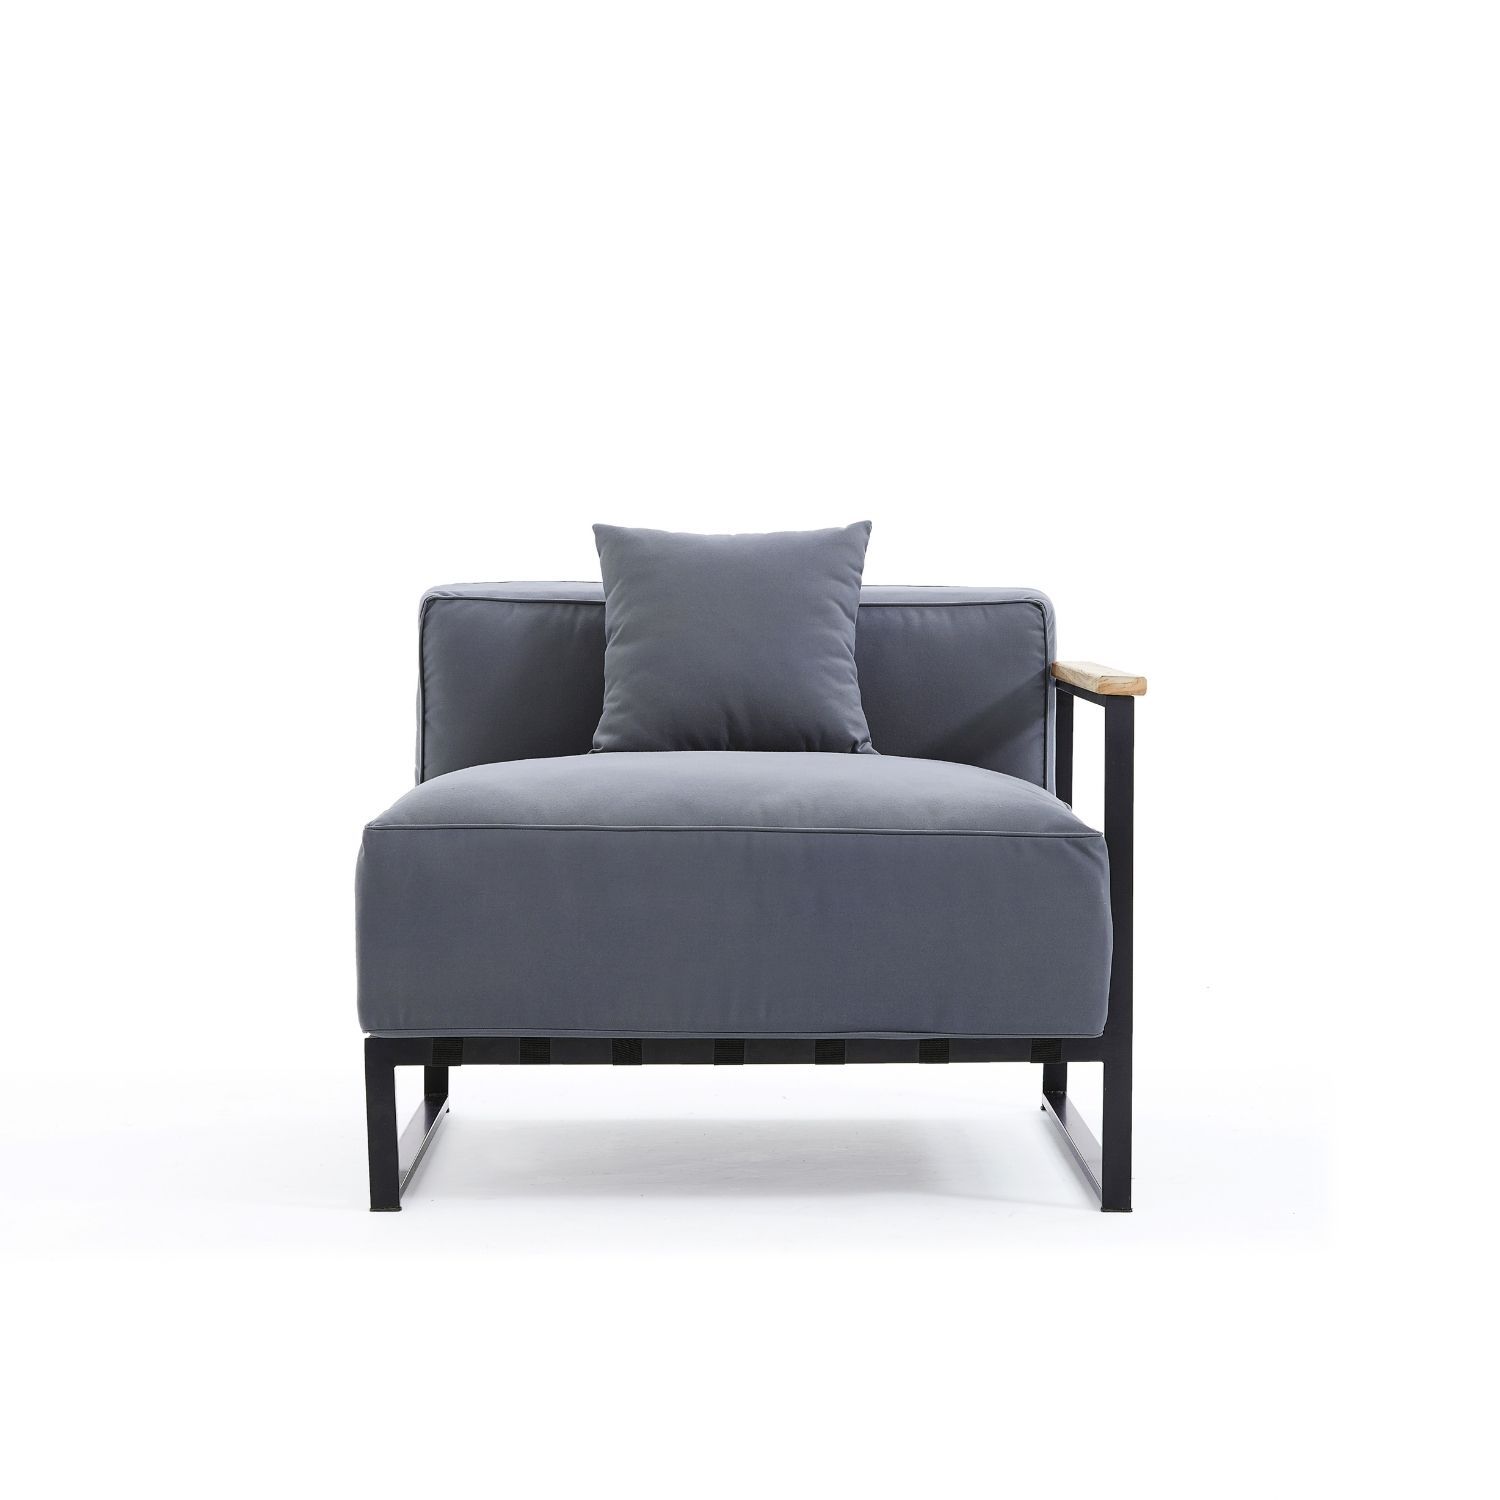 Abeo End Seat Sofa Zomanity Facing Right 